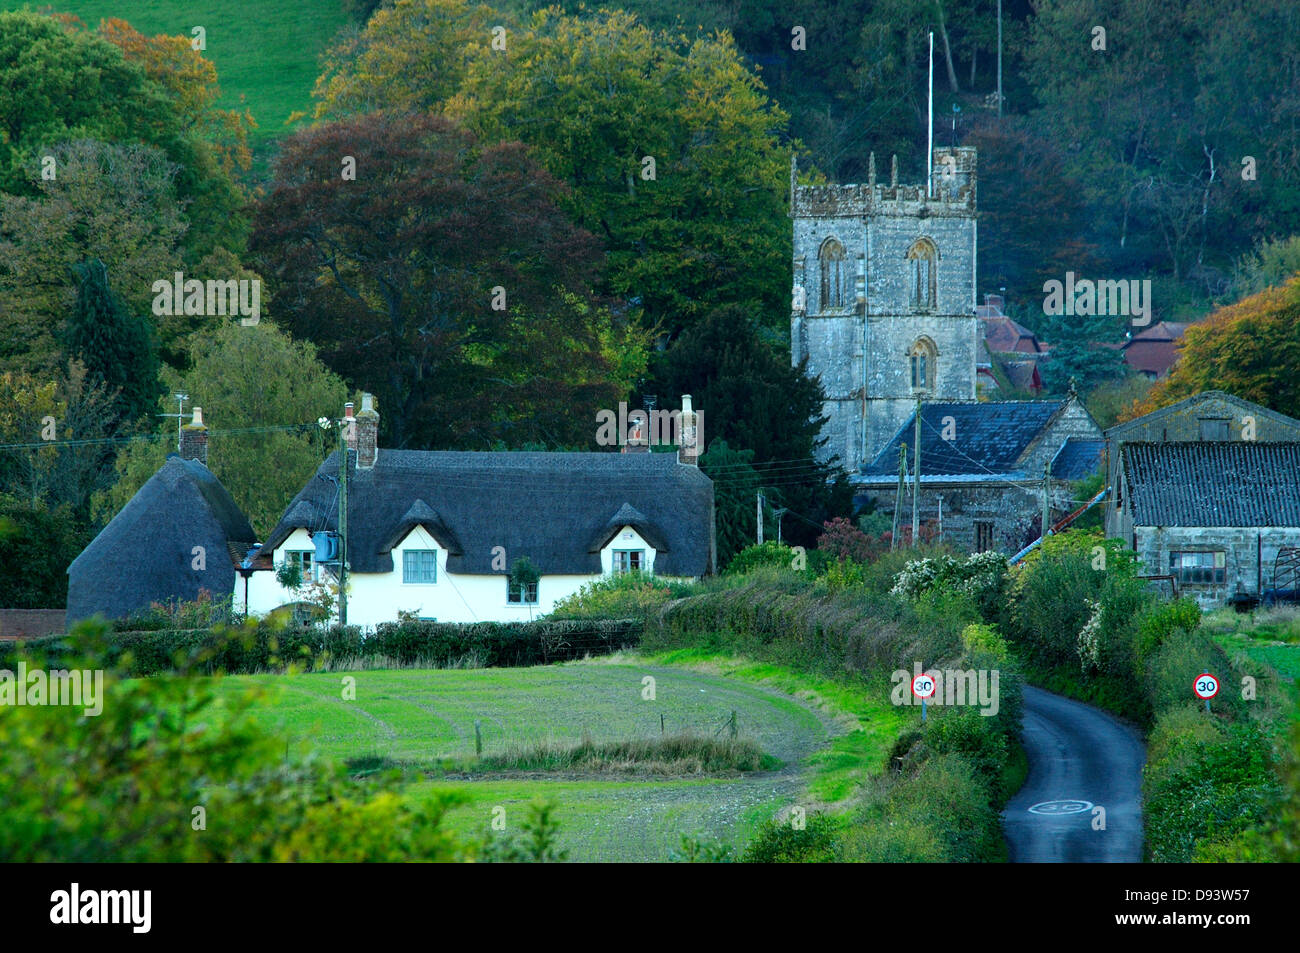 A view of the village of Hilton Dorset Stock Photo